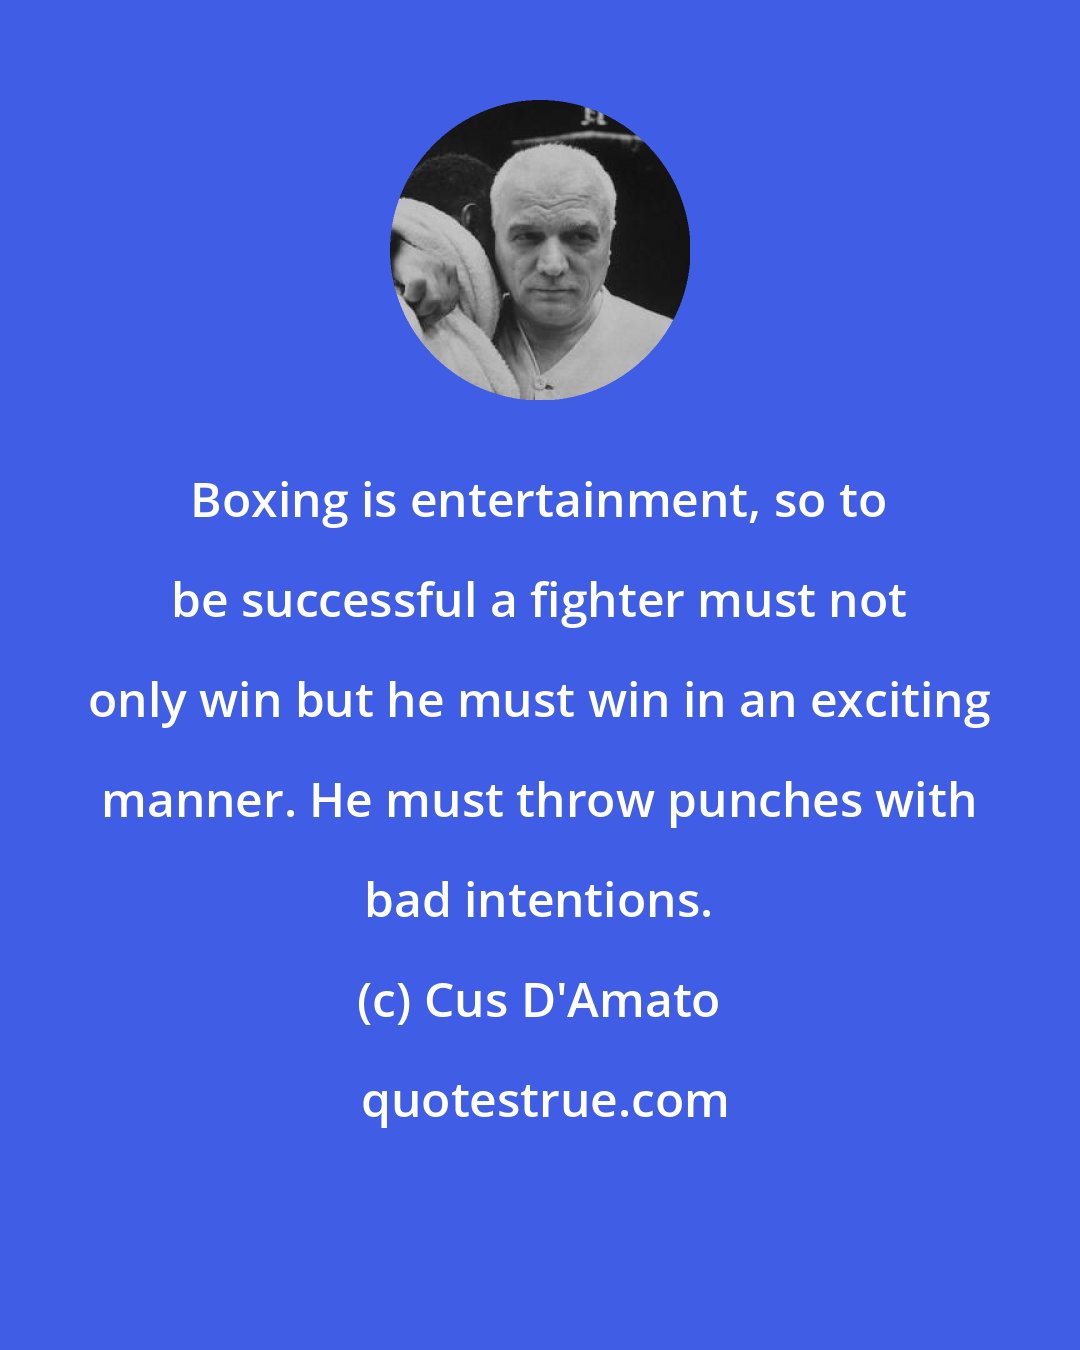 Cus D'Amato: Boxing is entertainment, so to be successful a fighter must not only win but he must win in an exciting manner. He must throw punches with bad intentions.